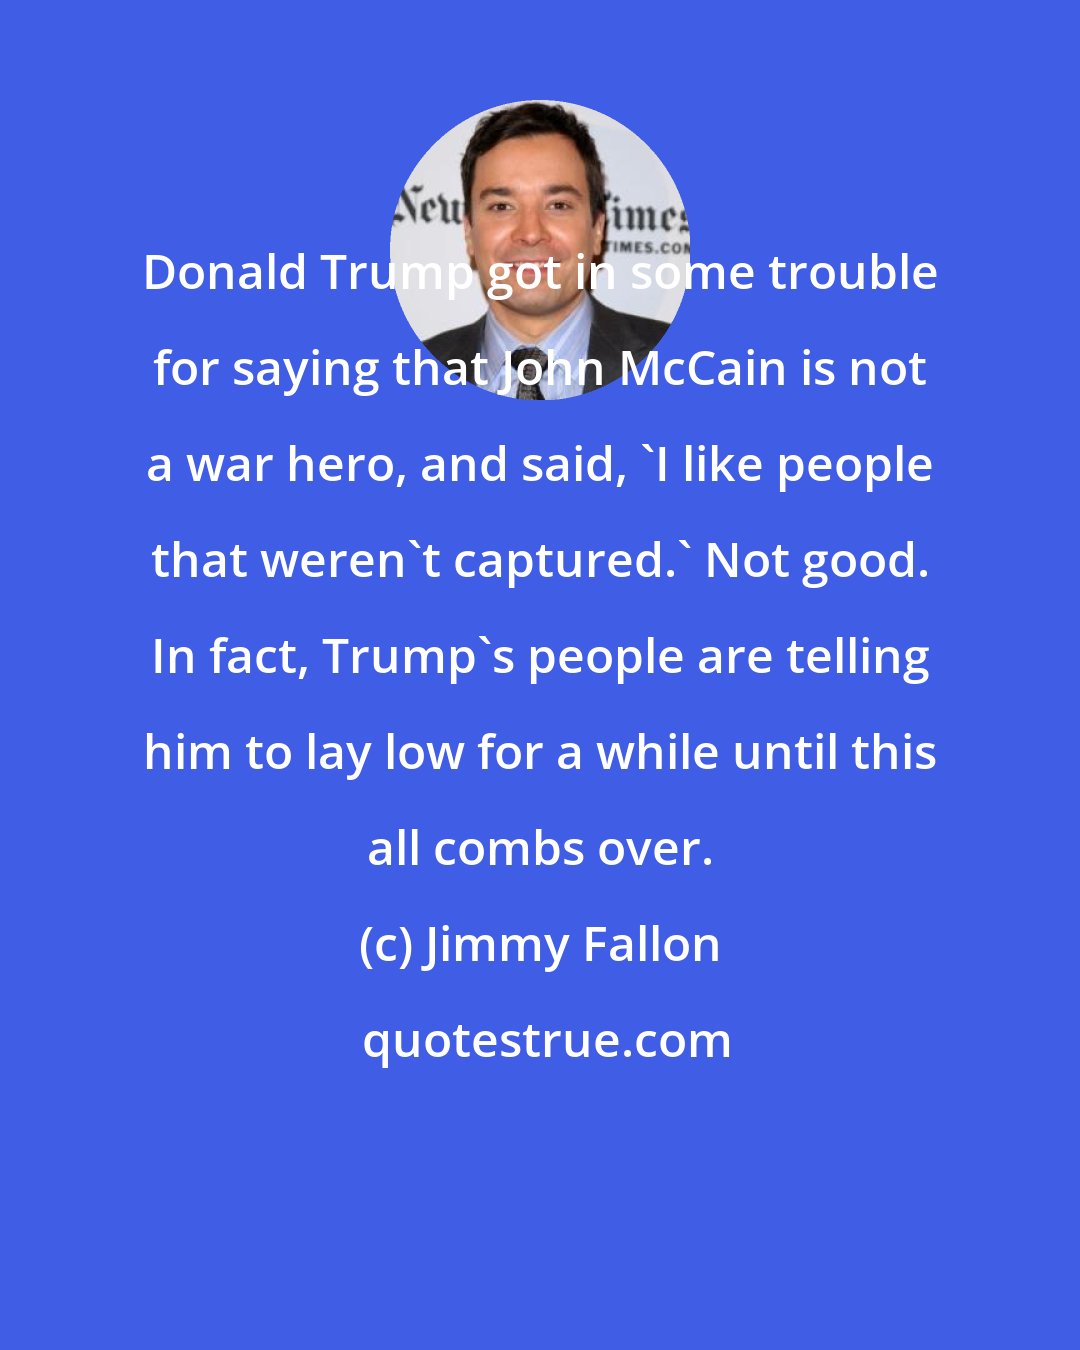 Jimmy Fallon: Donald Trump got in some trouble for saying that John McCain is not a war hero, and said, 'I like people that weren't captured.' Not good. In fact, Trump's people are telling him to lay low for a while until this all combs over.